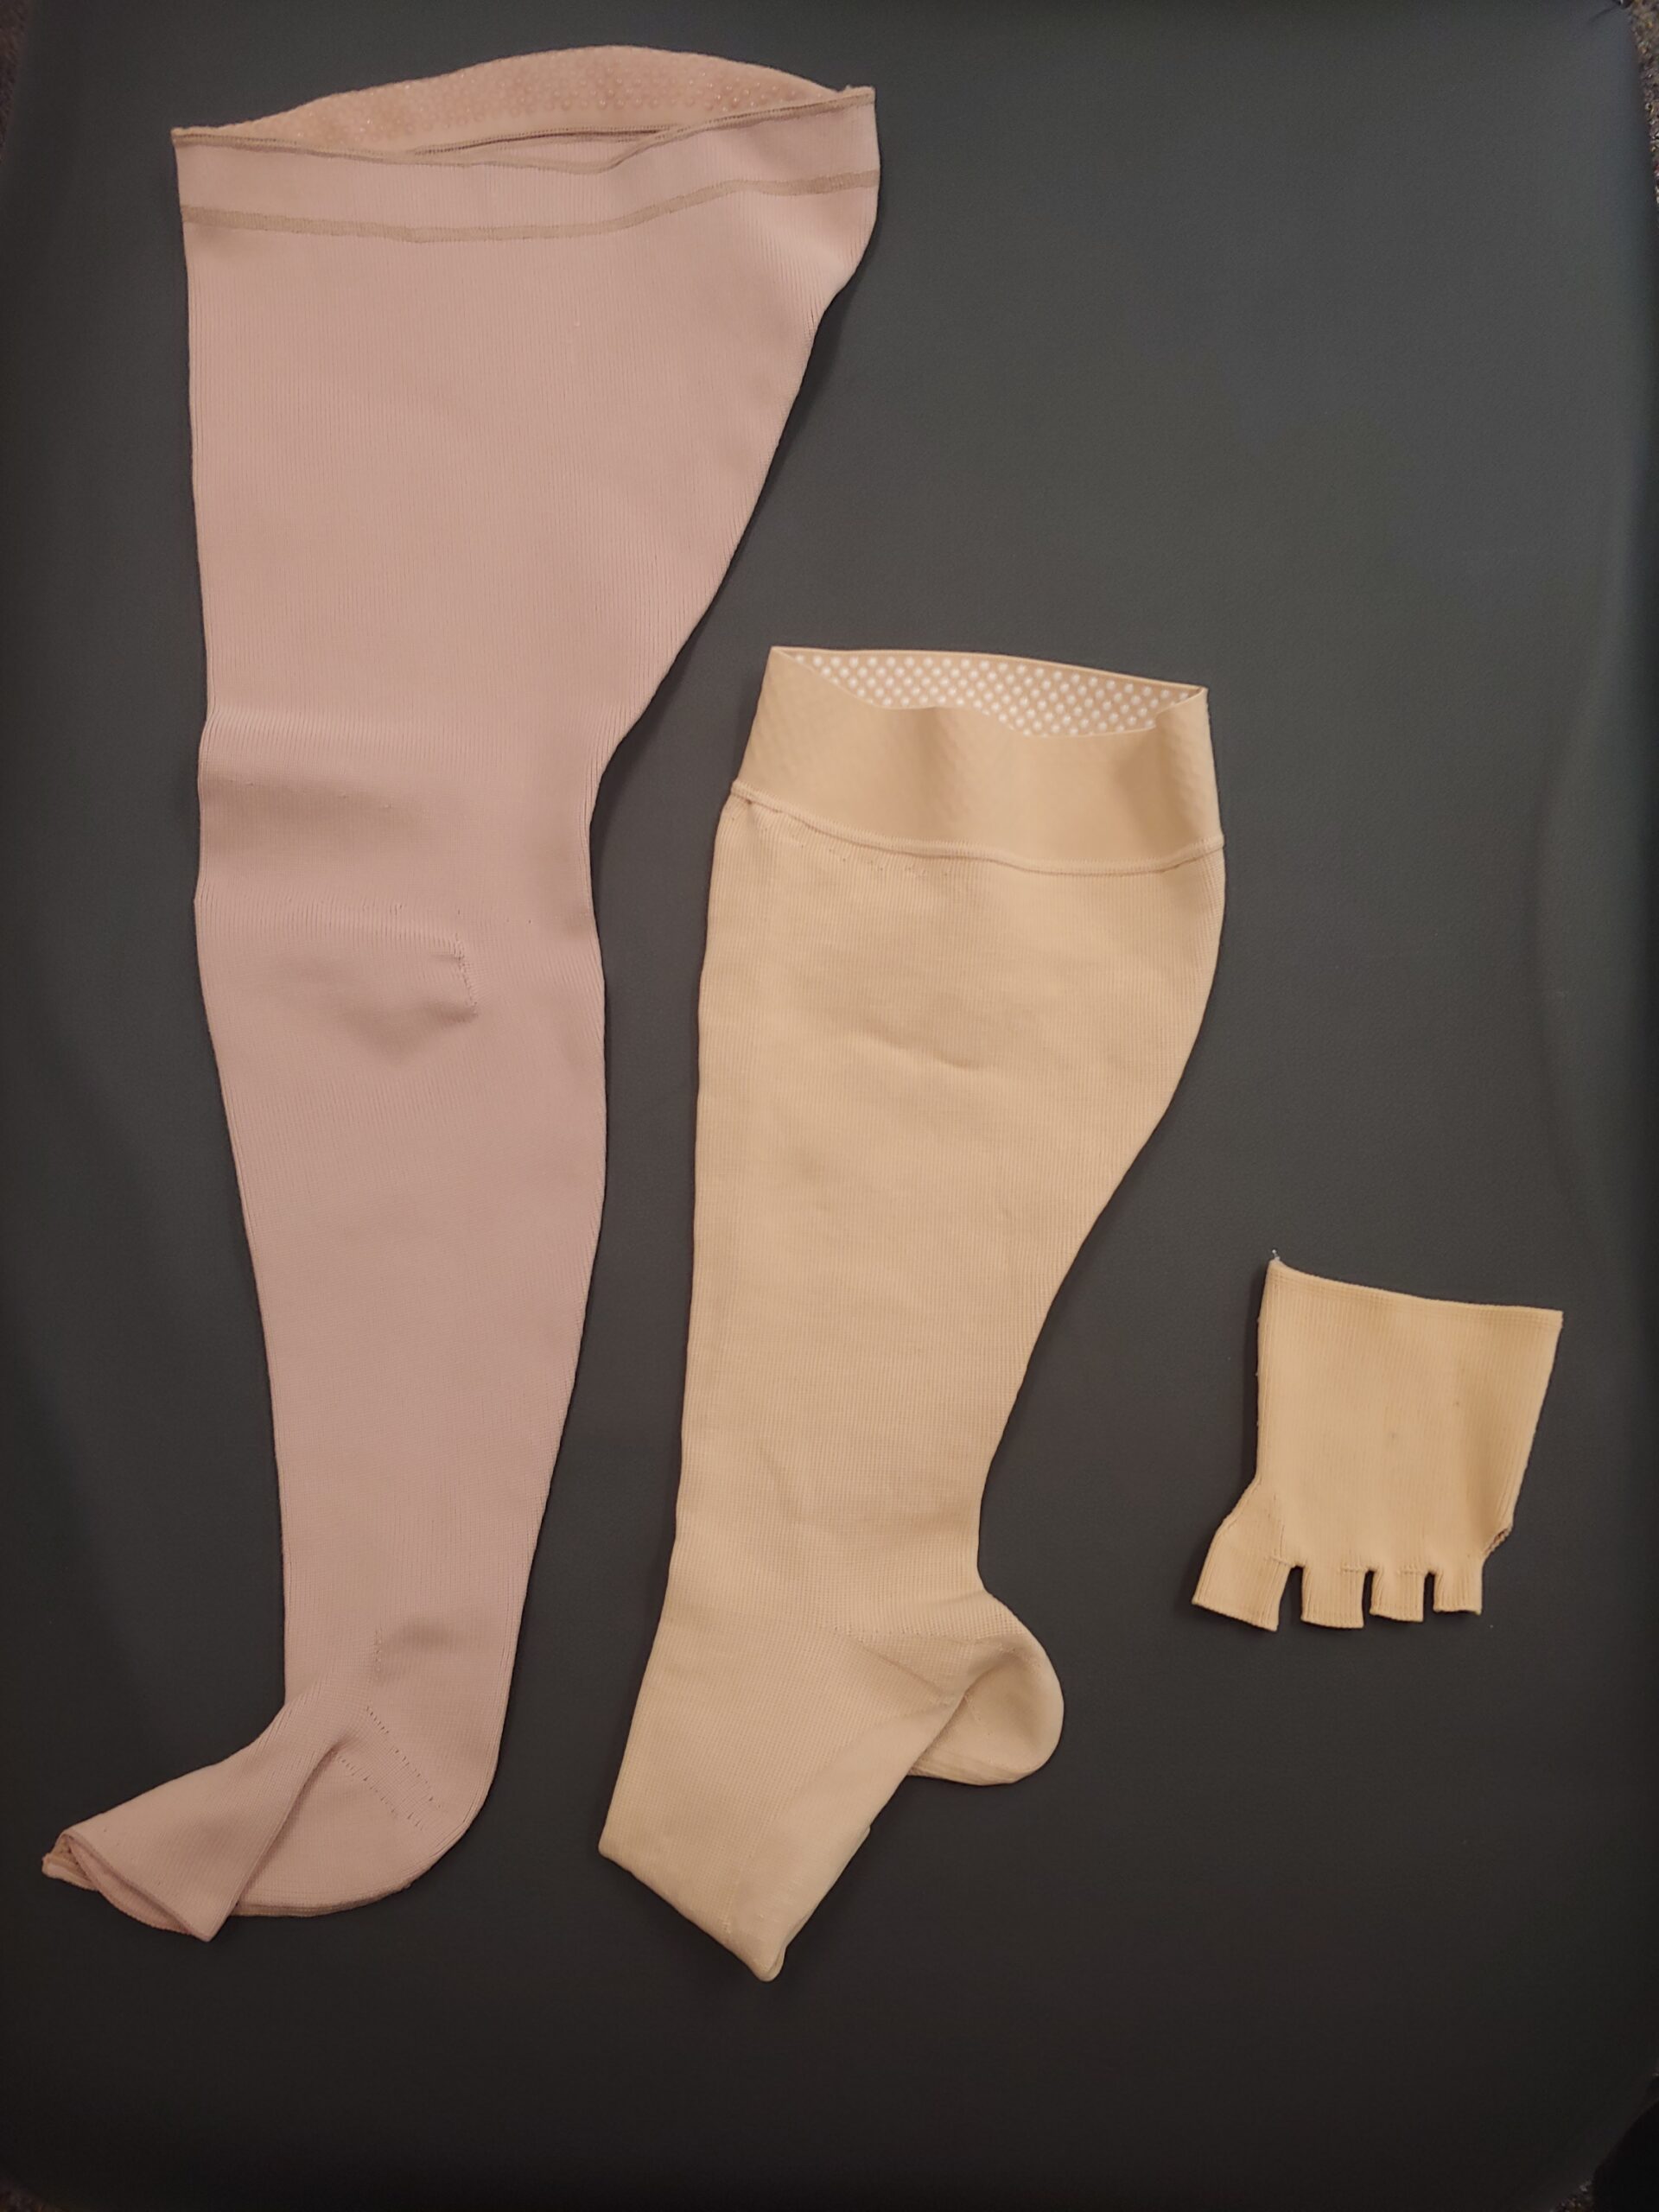 Compression Garments & Insurance (part 2) - Lymphedema Therapy Source